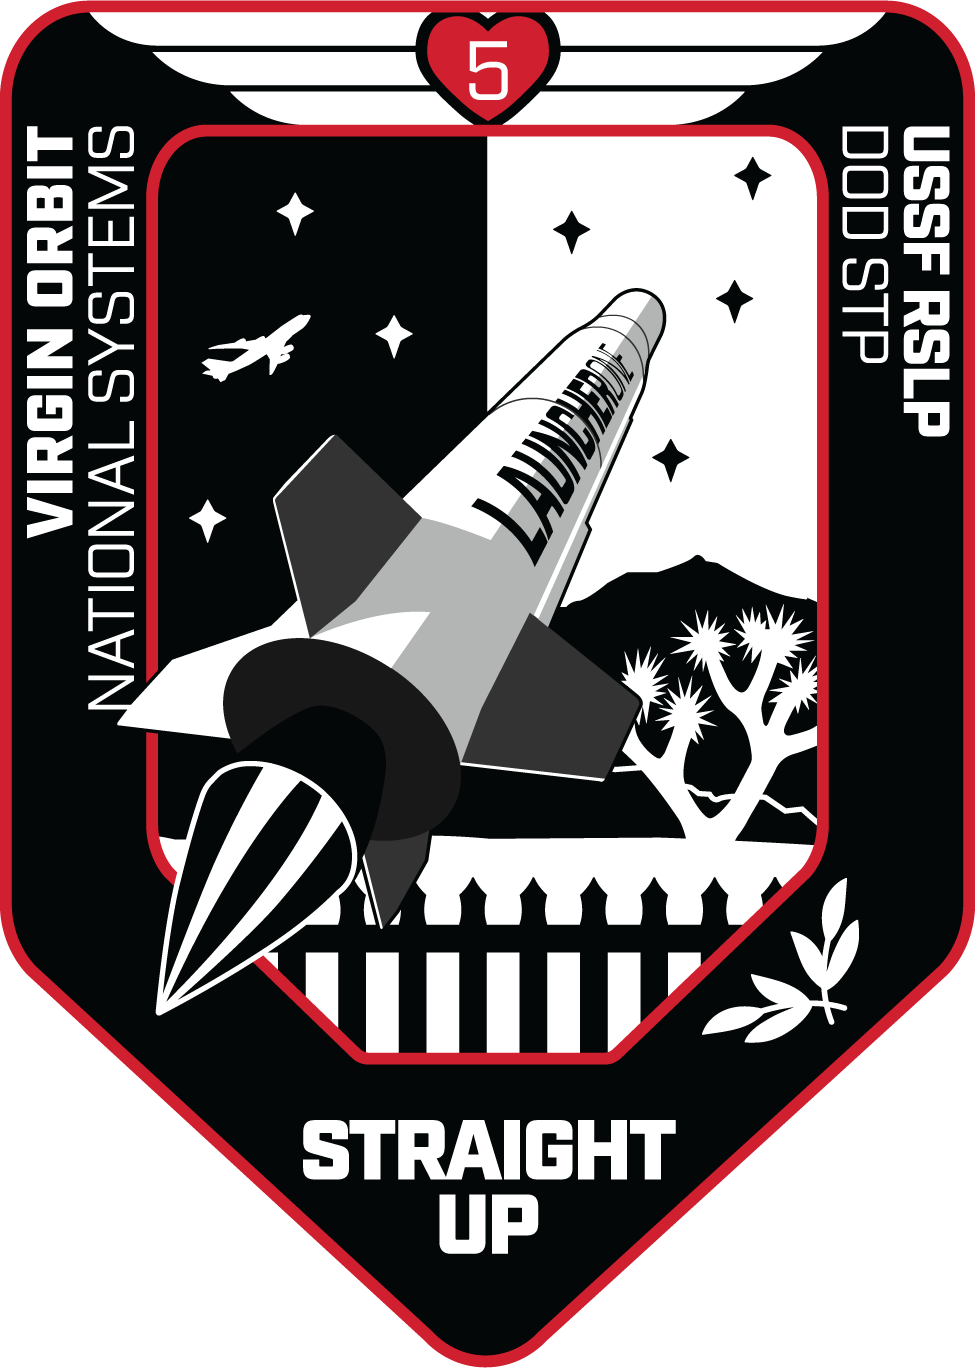 Mission patch for Straight Up